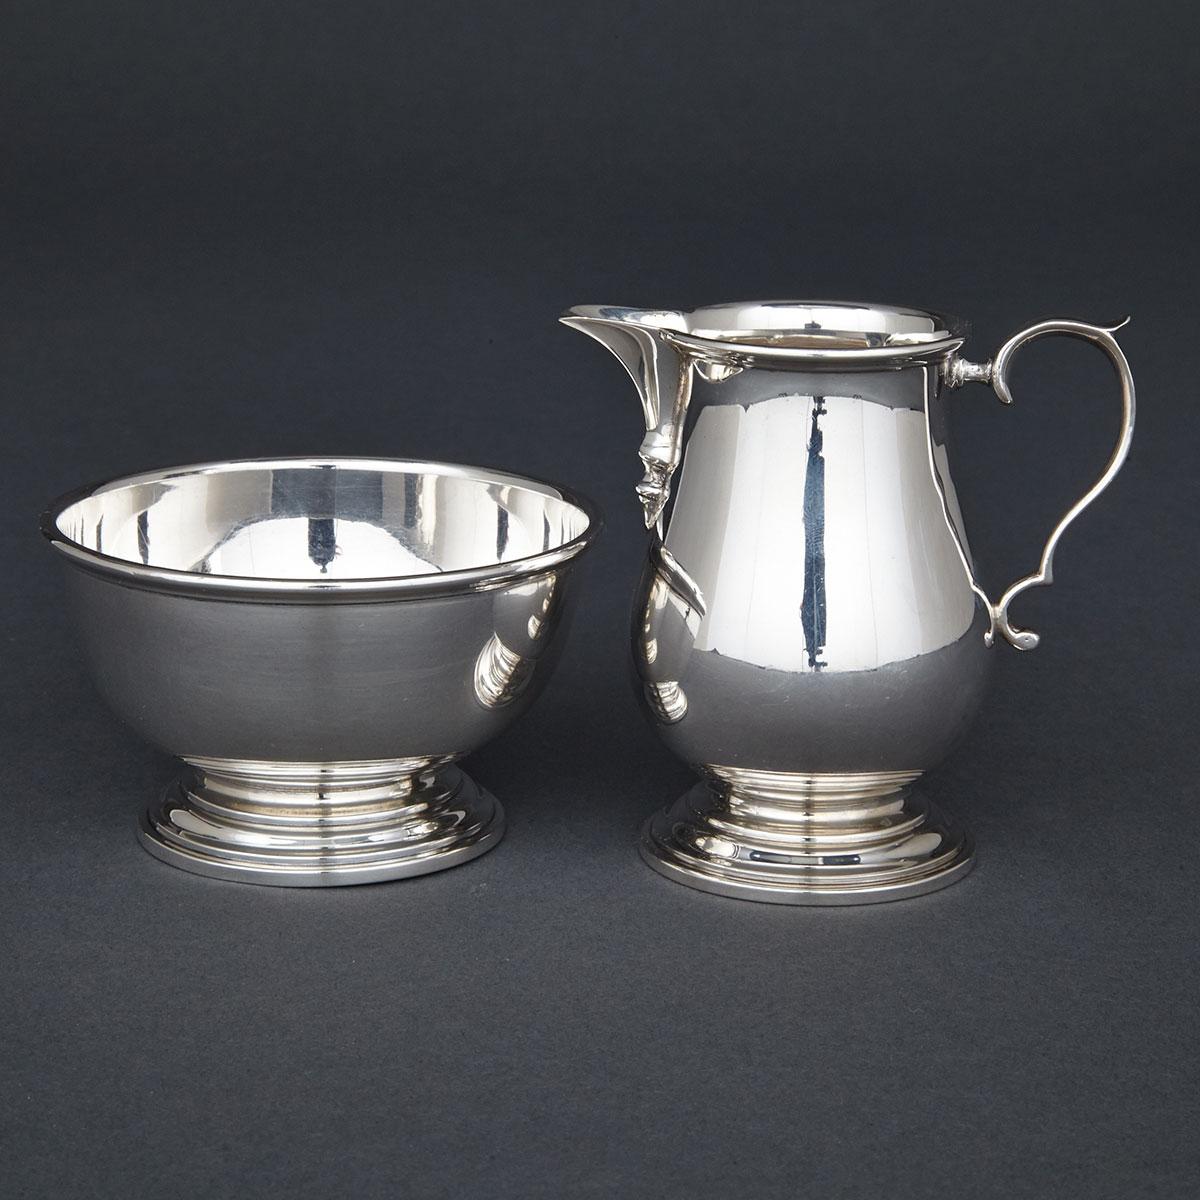 Canadian Silver Small Cream Jug and Sugar Bowl, Henry Birks & Sons, Montreal, Que., 1947